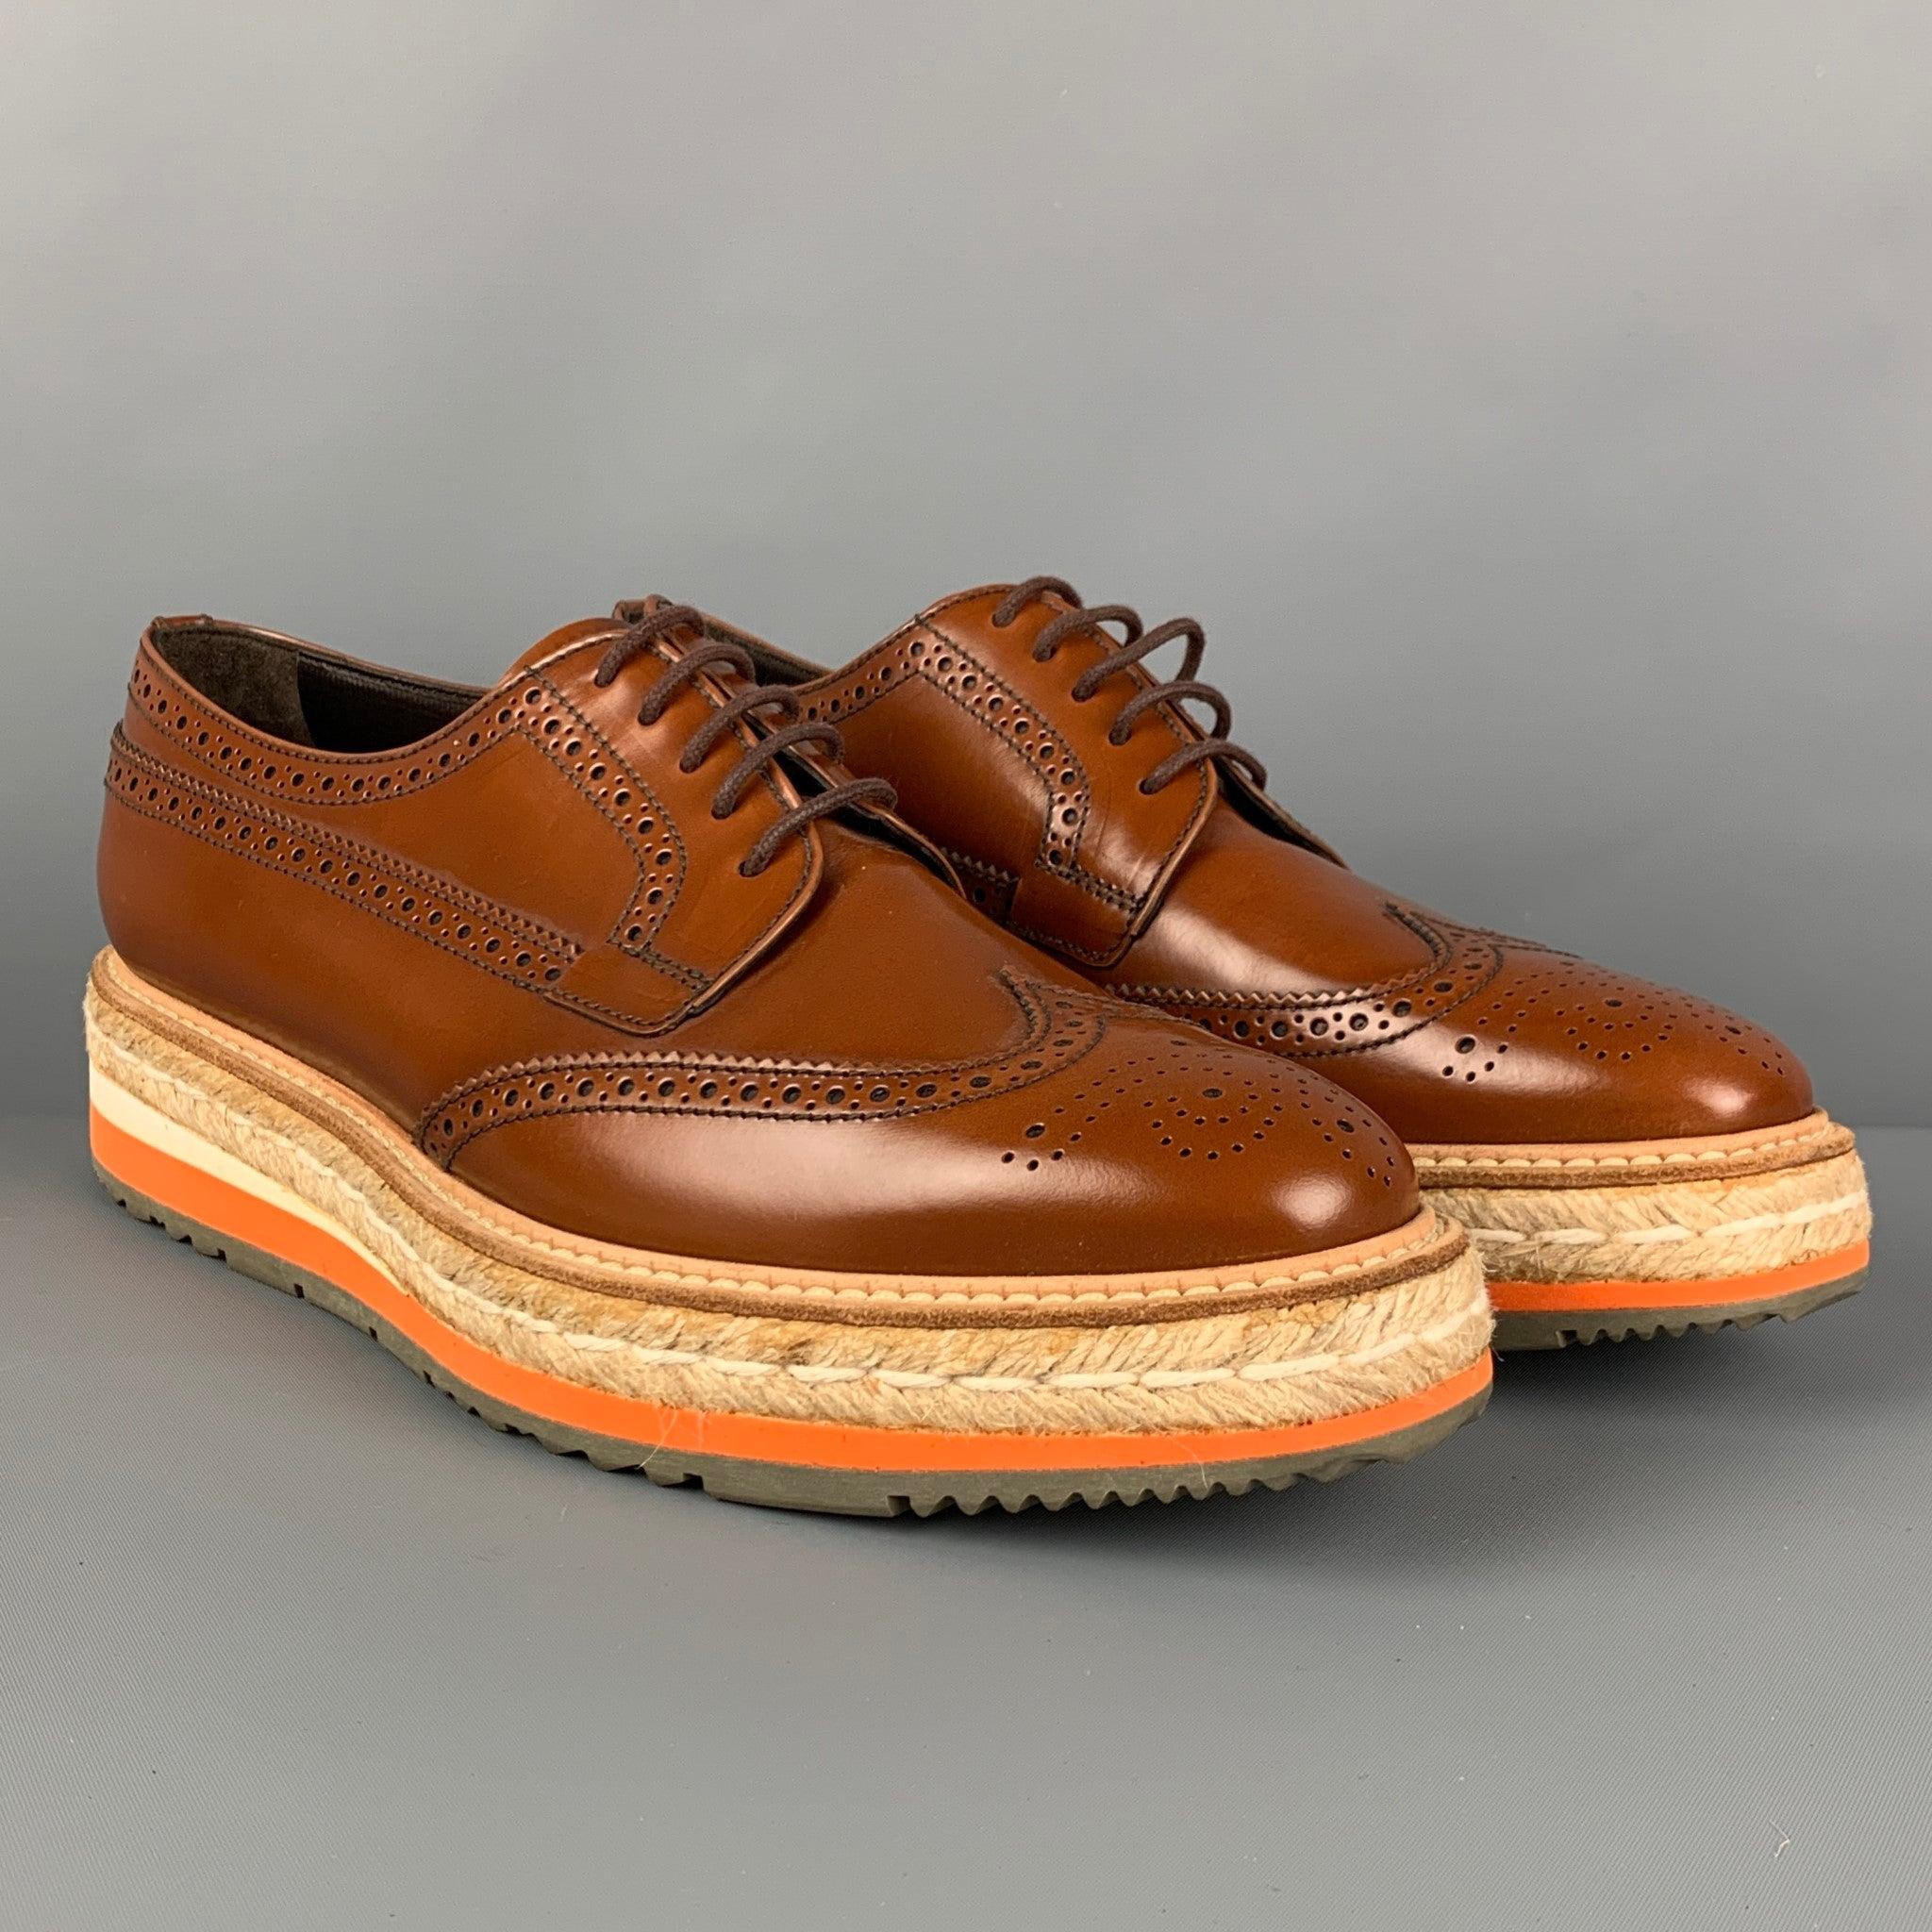 PRADA shoes comes in a tan perforated leather featuring a wingtip style, orange trim, jute trim platform sole, and a lace up closure. Made in Italy.Very Good
Pre-Owned Condition. 

Marked:   40.5Outsole: 11.5 inches  x 4 inches 
  
  
 
Reference: